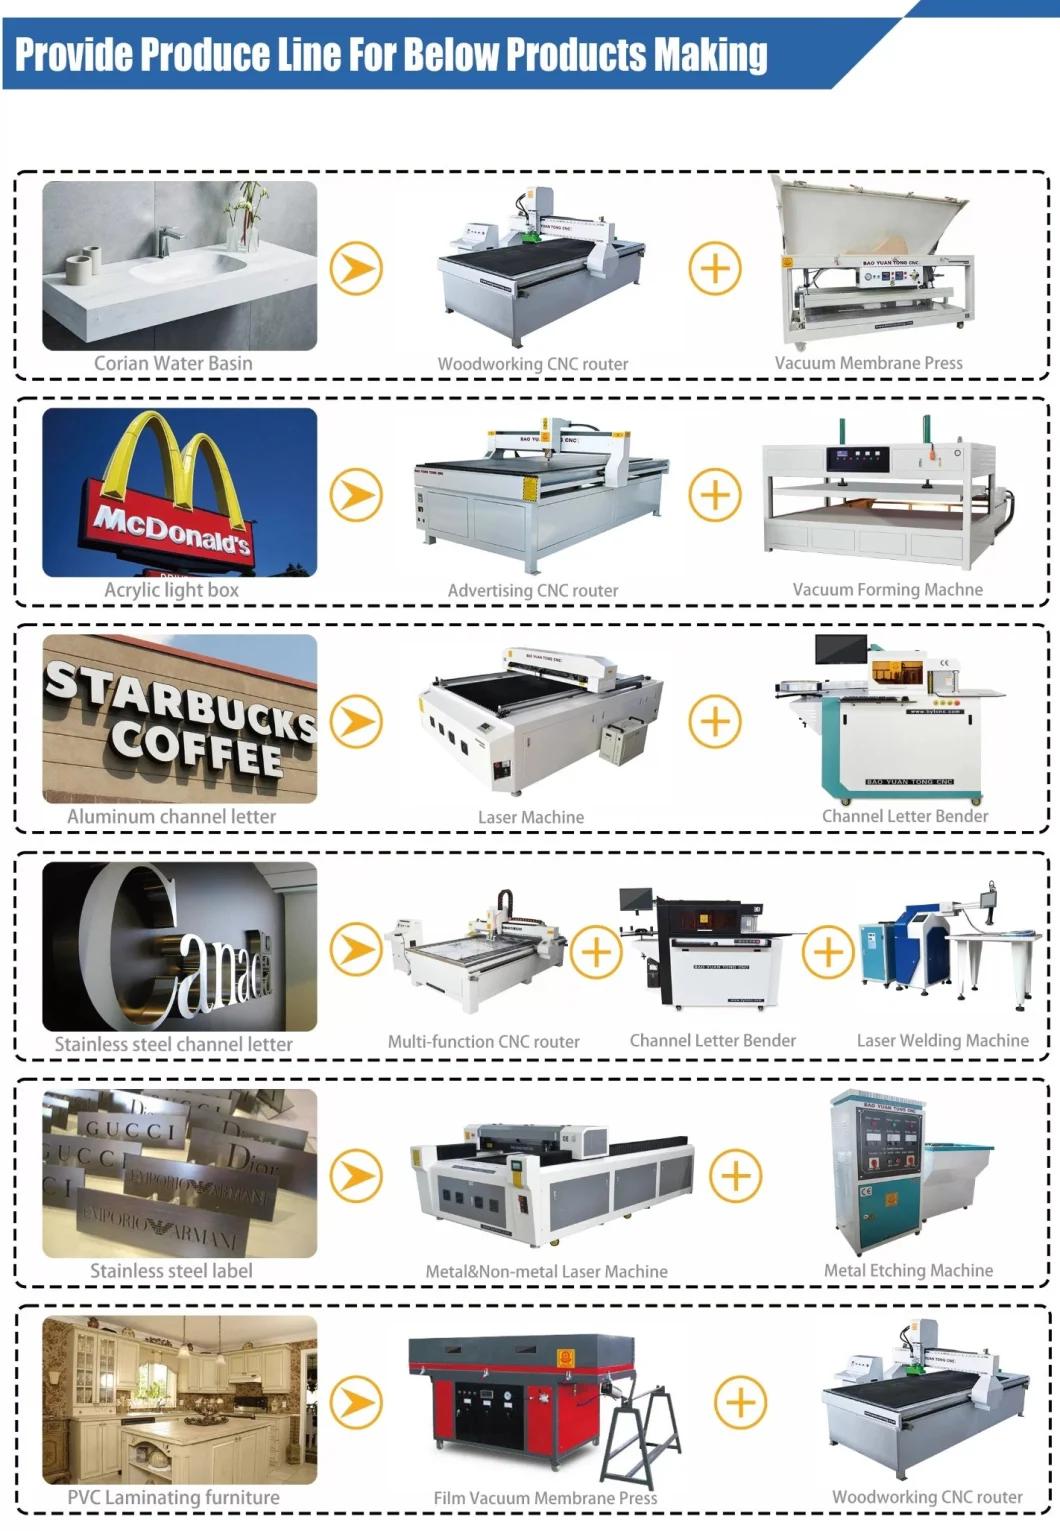 Direct Manufacture Automatic Thermoforming Machine Vacuum Forming Machine